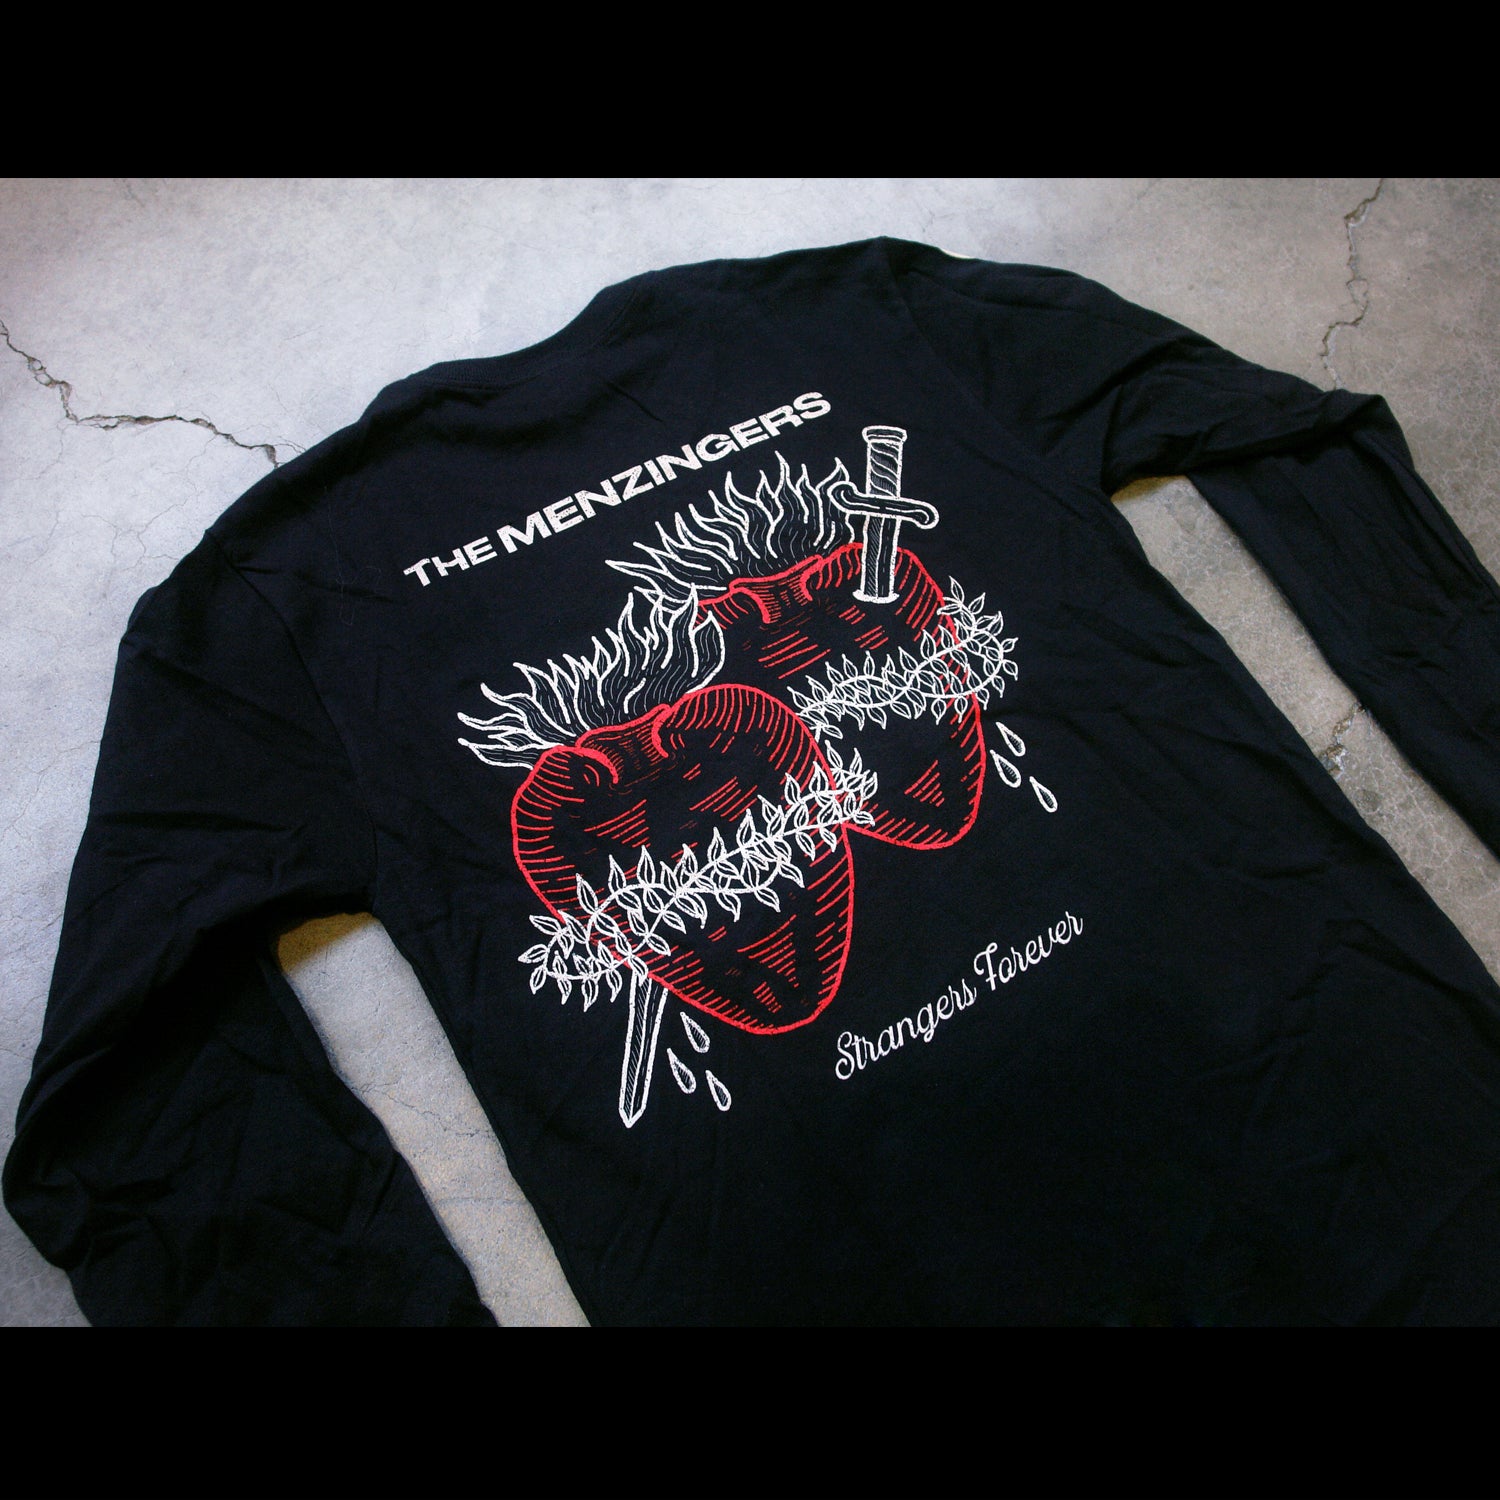 angled photo of the back of a long sleeve tee laid flat on a cracked concrete floor. full back print with cream on top that says the menzingers & two hearts in red with a sword through them. the hearts have cream fire on top barb wire wrapped around. they are bleeding in cursive below strangers forever.